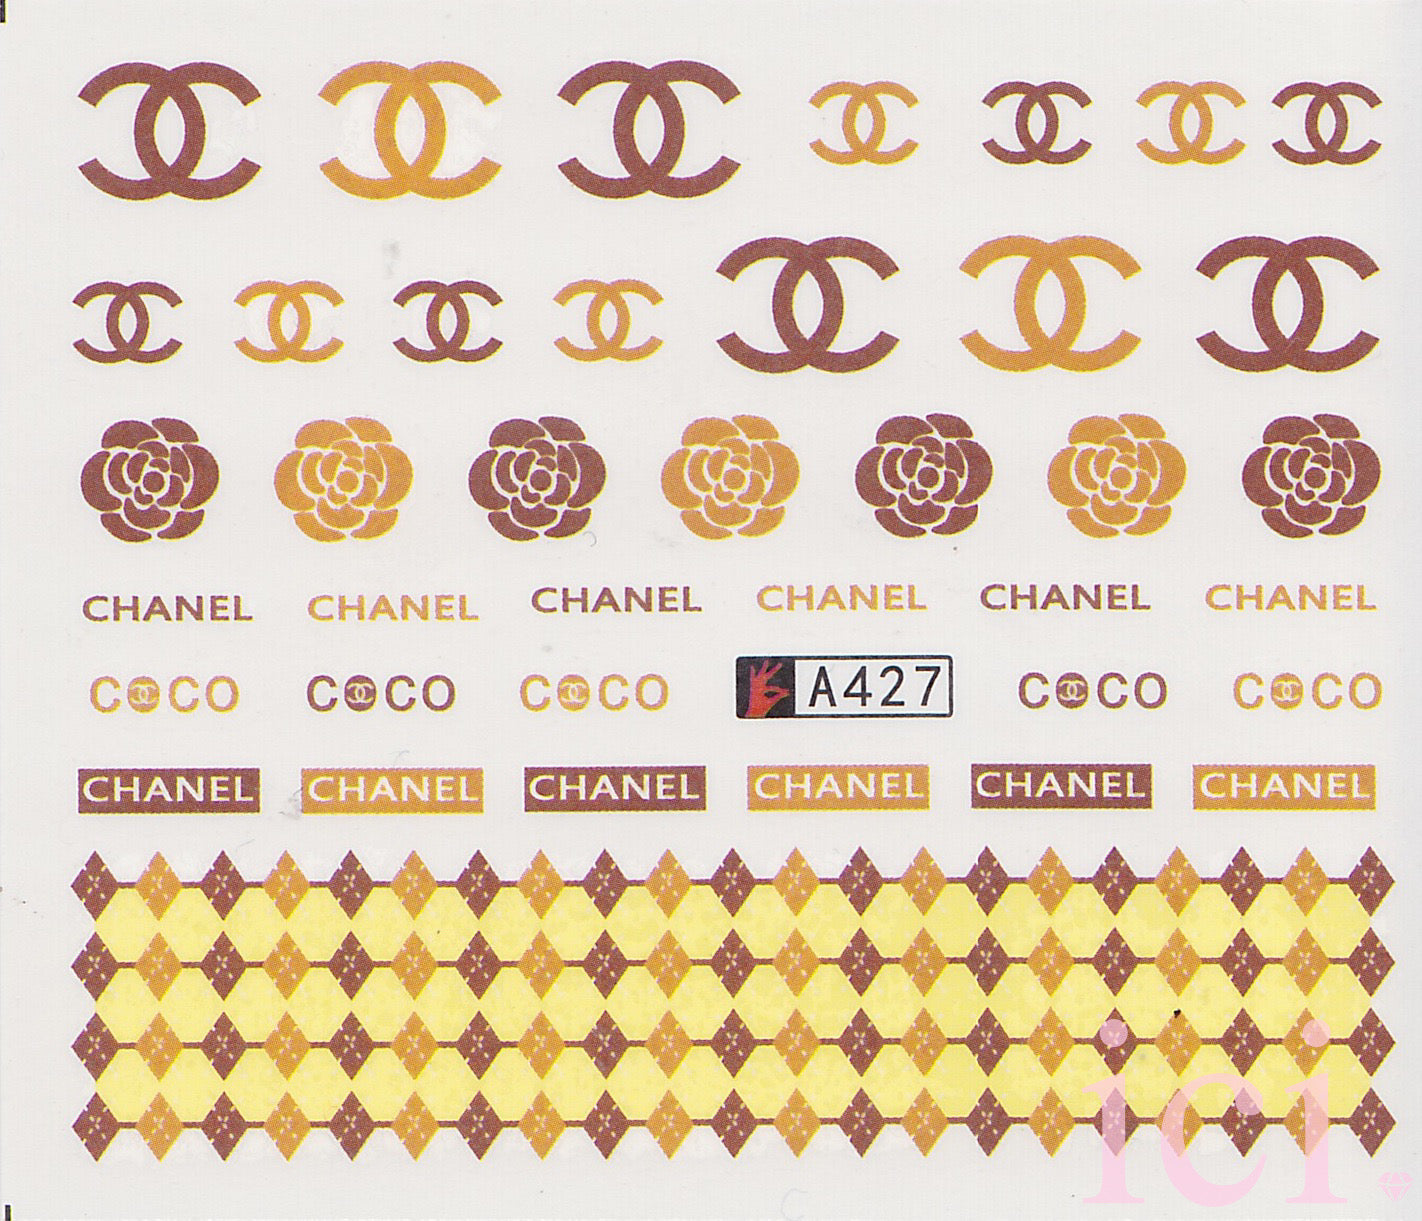 Chanel A427